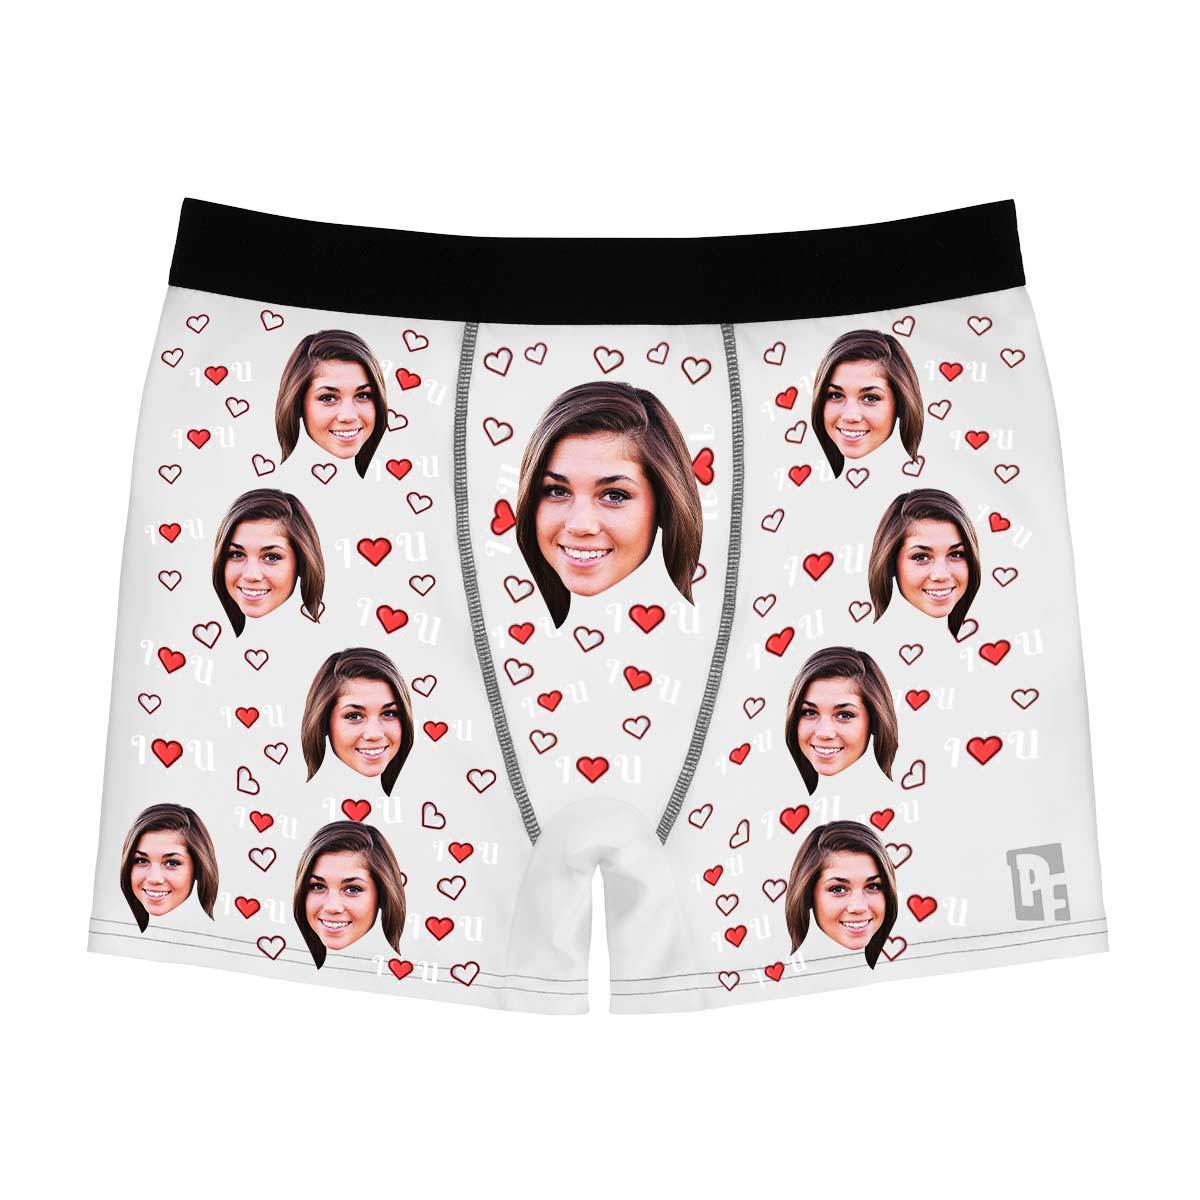 White I <3 You men's boxer briefs personalized with photo printed on them